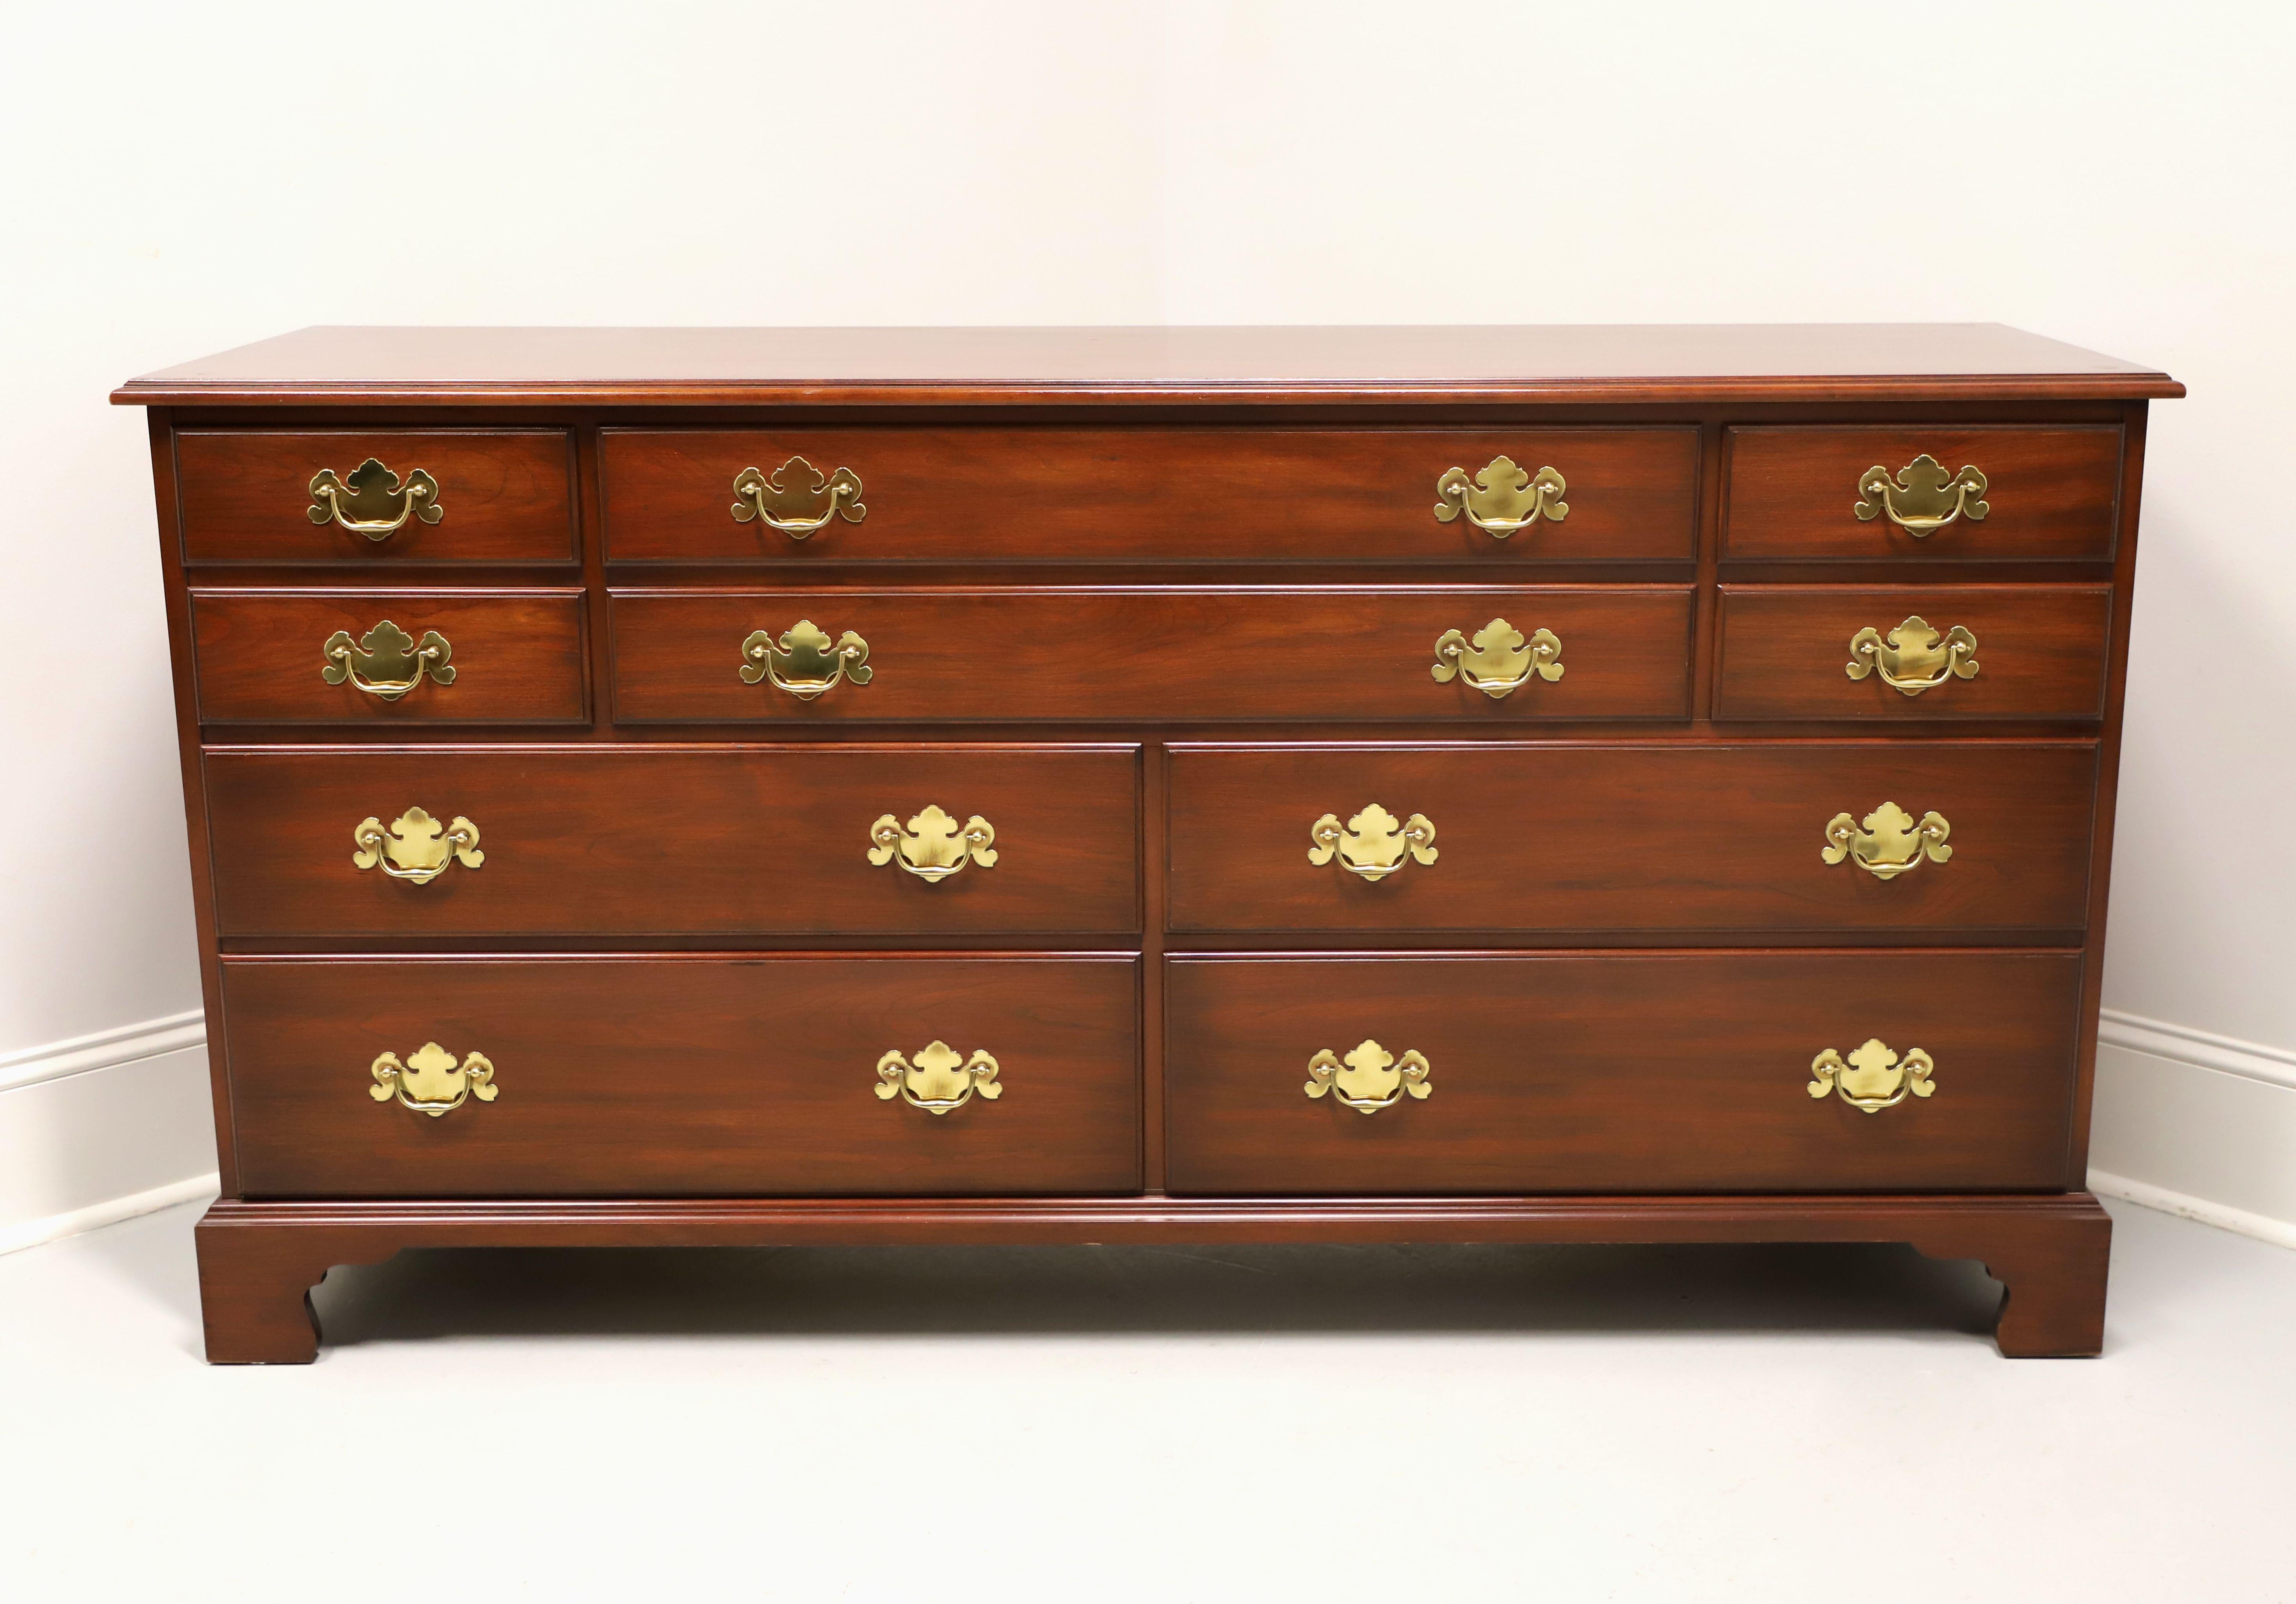 A triple dresser in the Chippendale style by Henkel Harris, of Winchester, Virginia, USA. Solid wild black cherry wood with brass hardware, ogee edge to top, and bracket feet. Features ten various size drawers of dovetail construction, with two